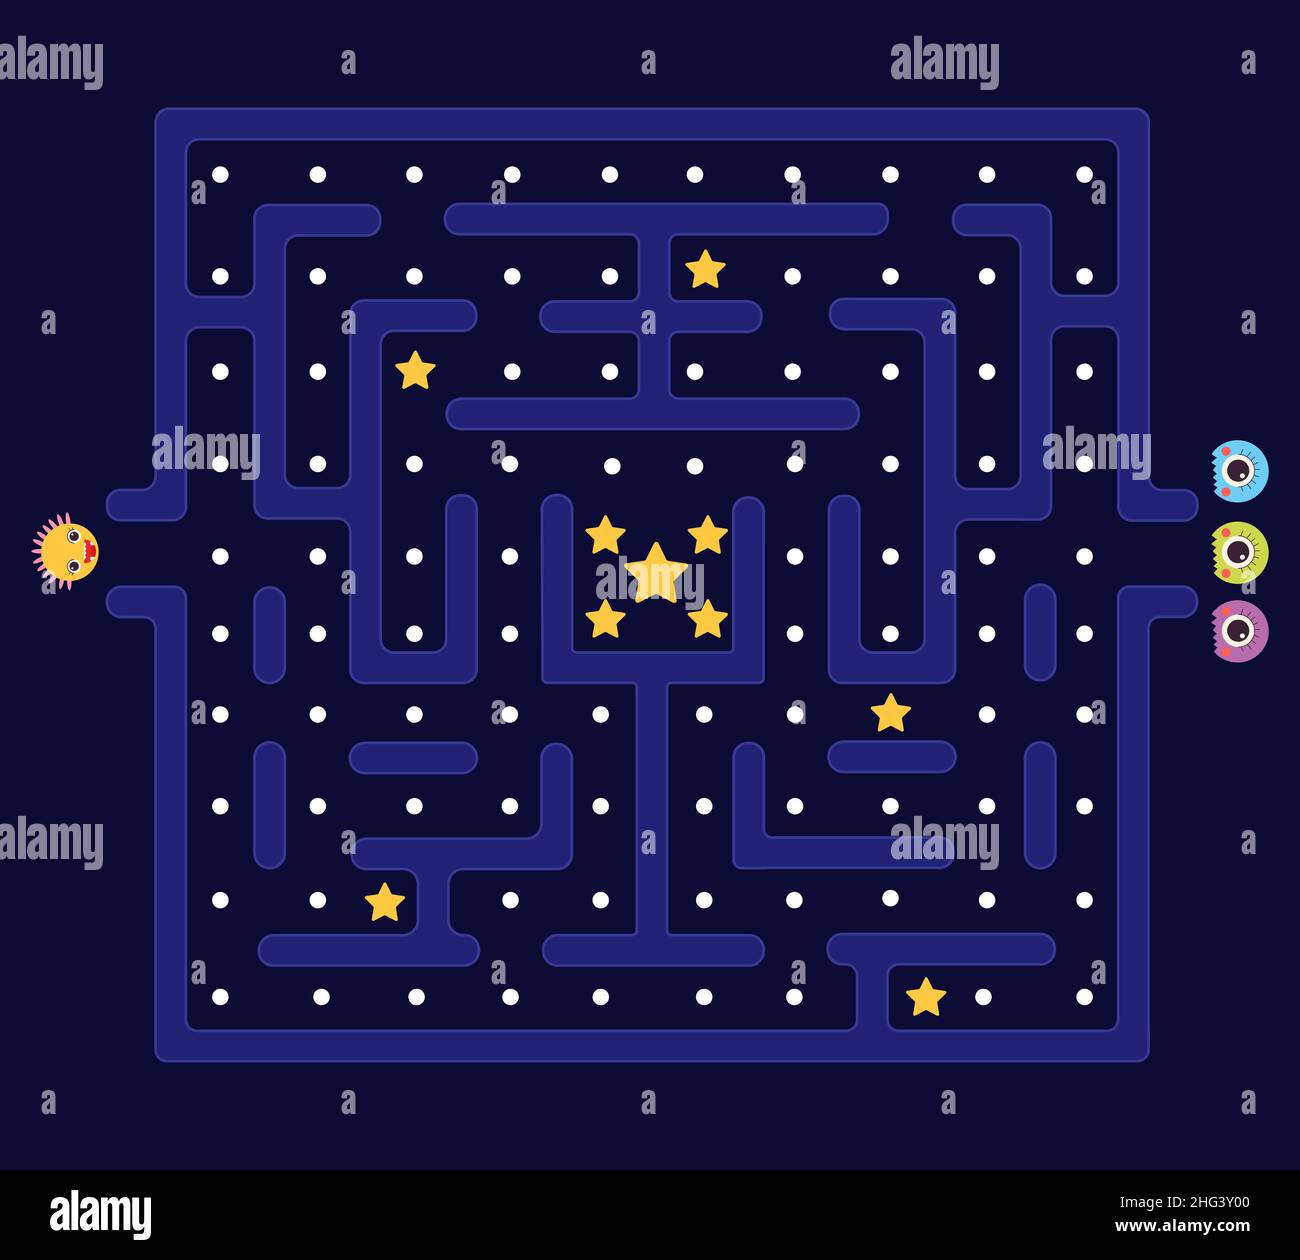 Arcade maze. Pacman background, pac man retro video computer game. Labyrinth defender and monsters. Kids app play in 80s style, videogame level decent Stock Vector